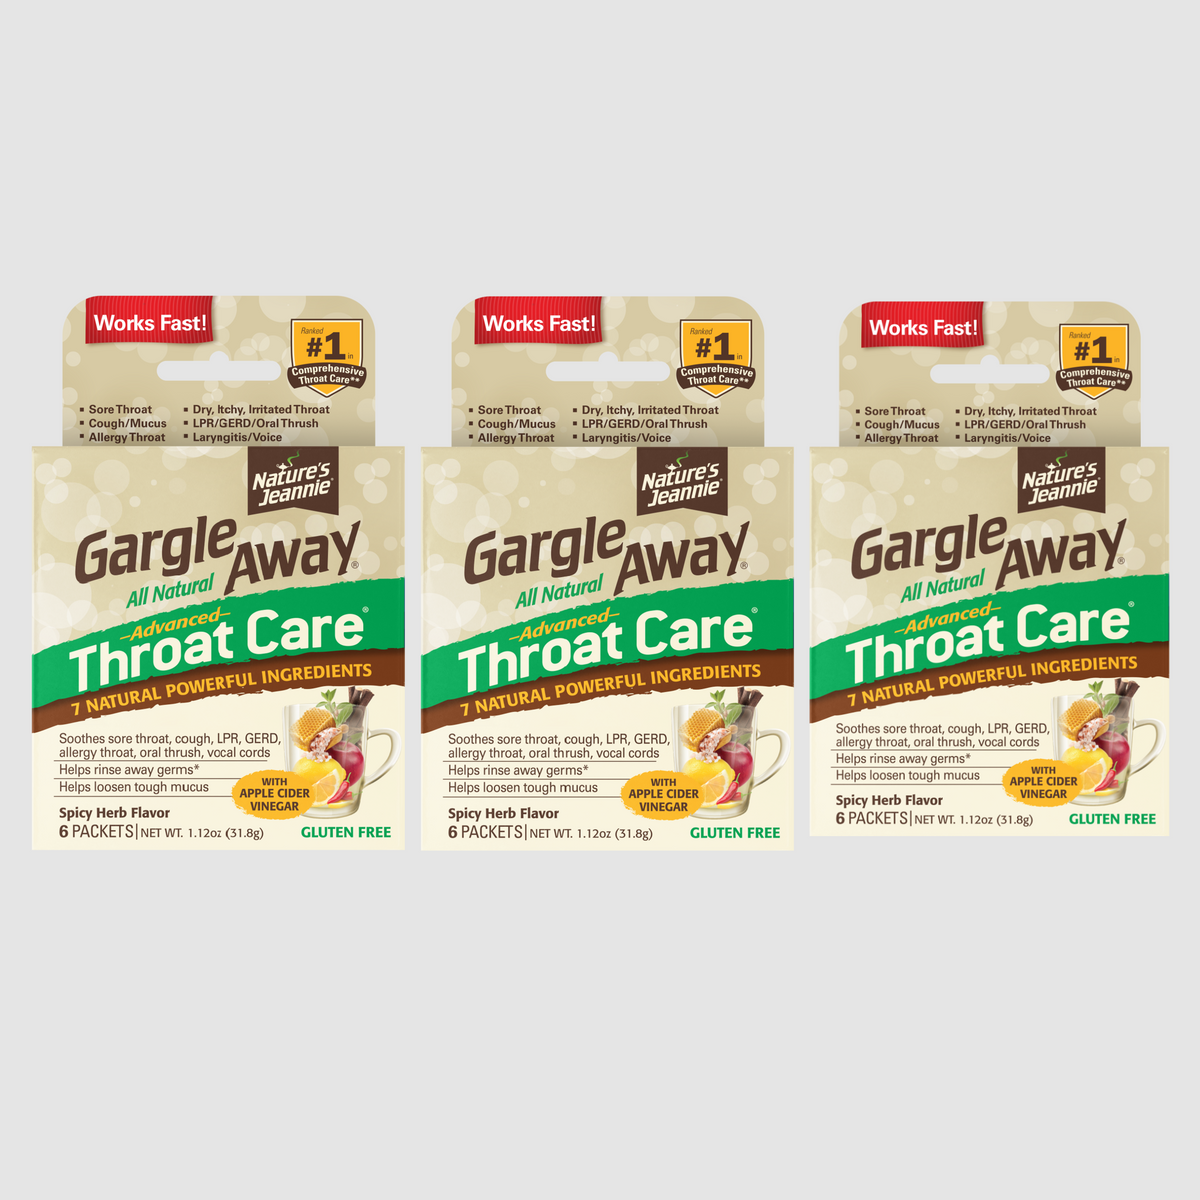 Gargle Away Throat Care packaging - three 6-CT packages side by side.